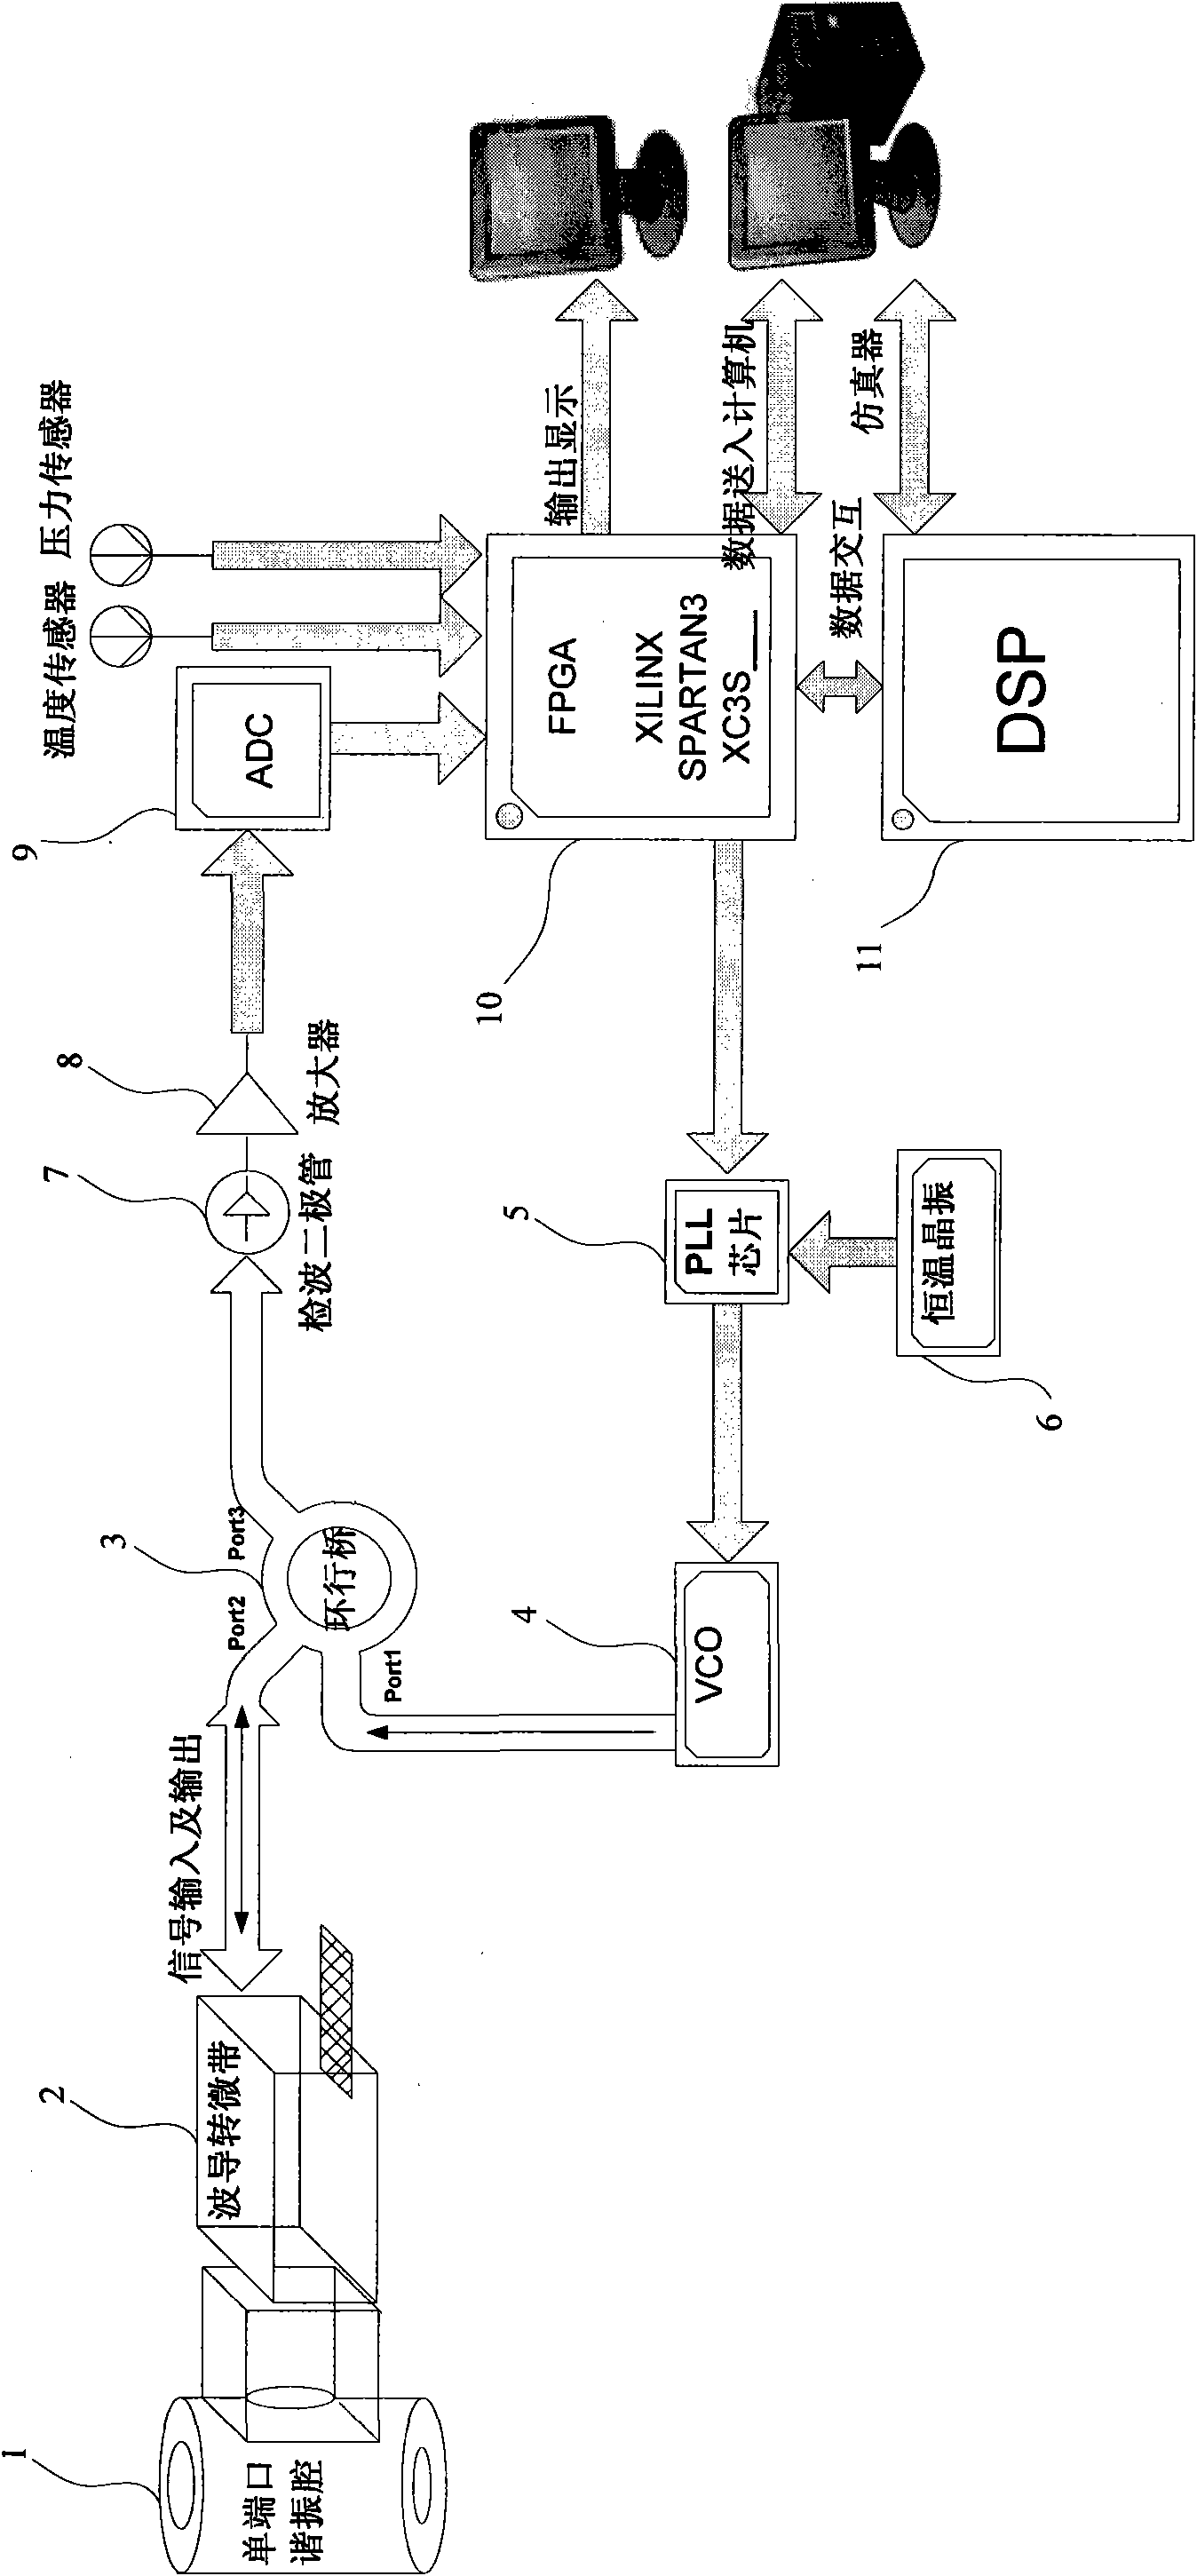 Micro-water content test system based on resonant cavity perturbation method